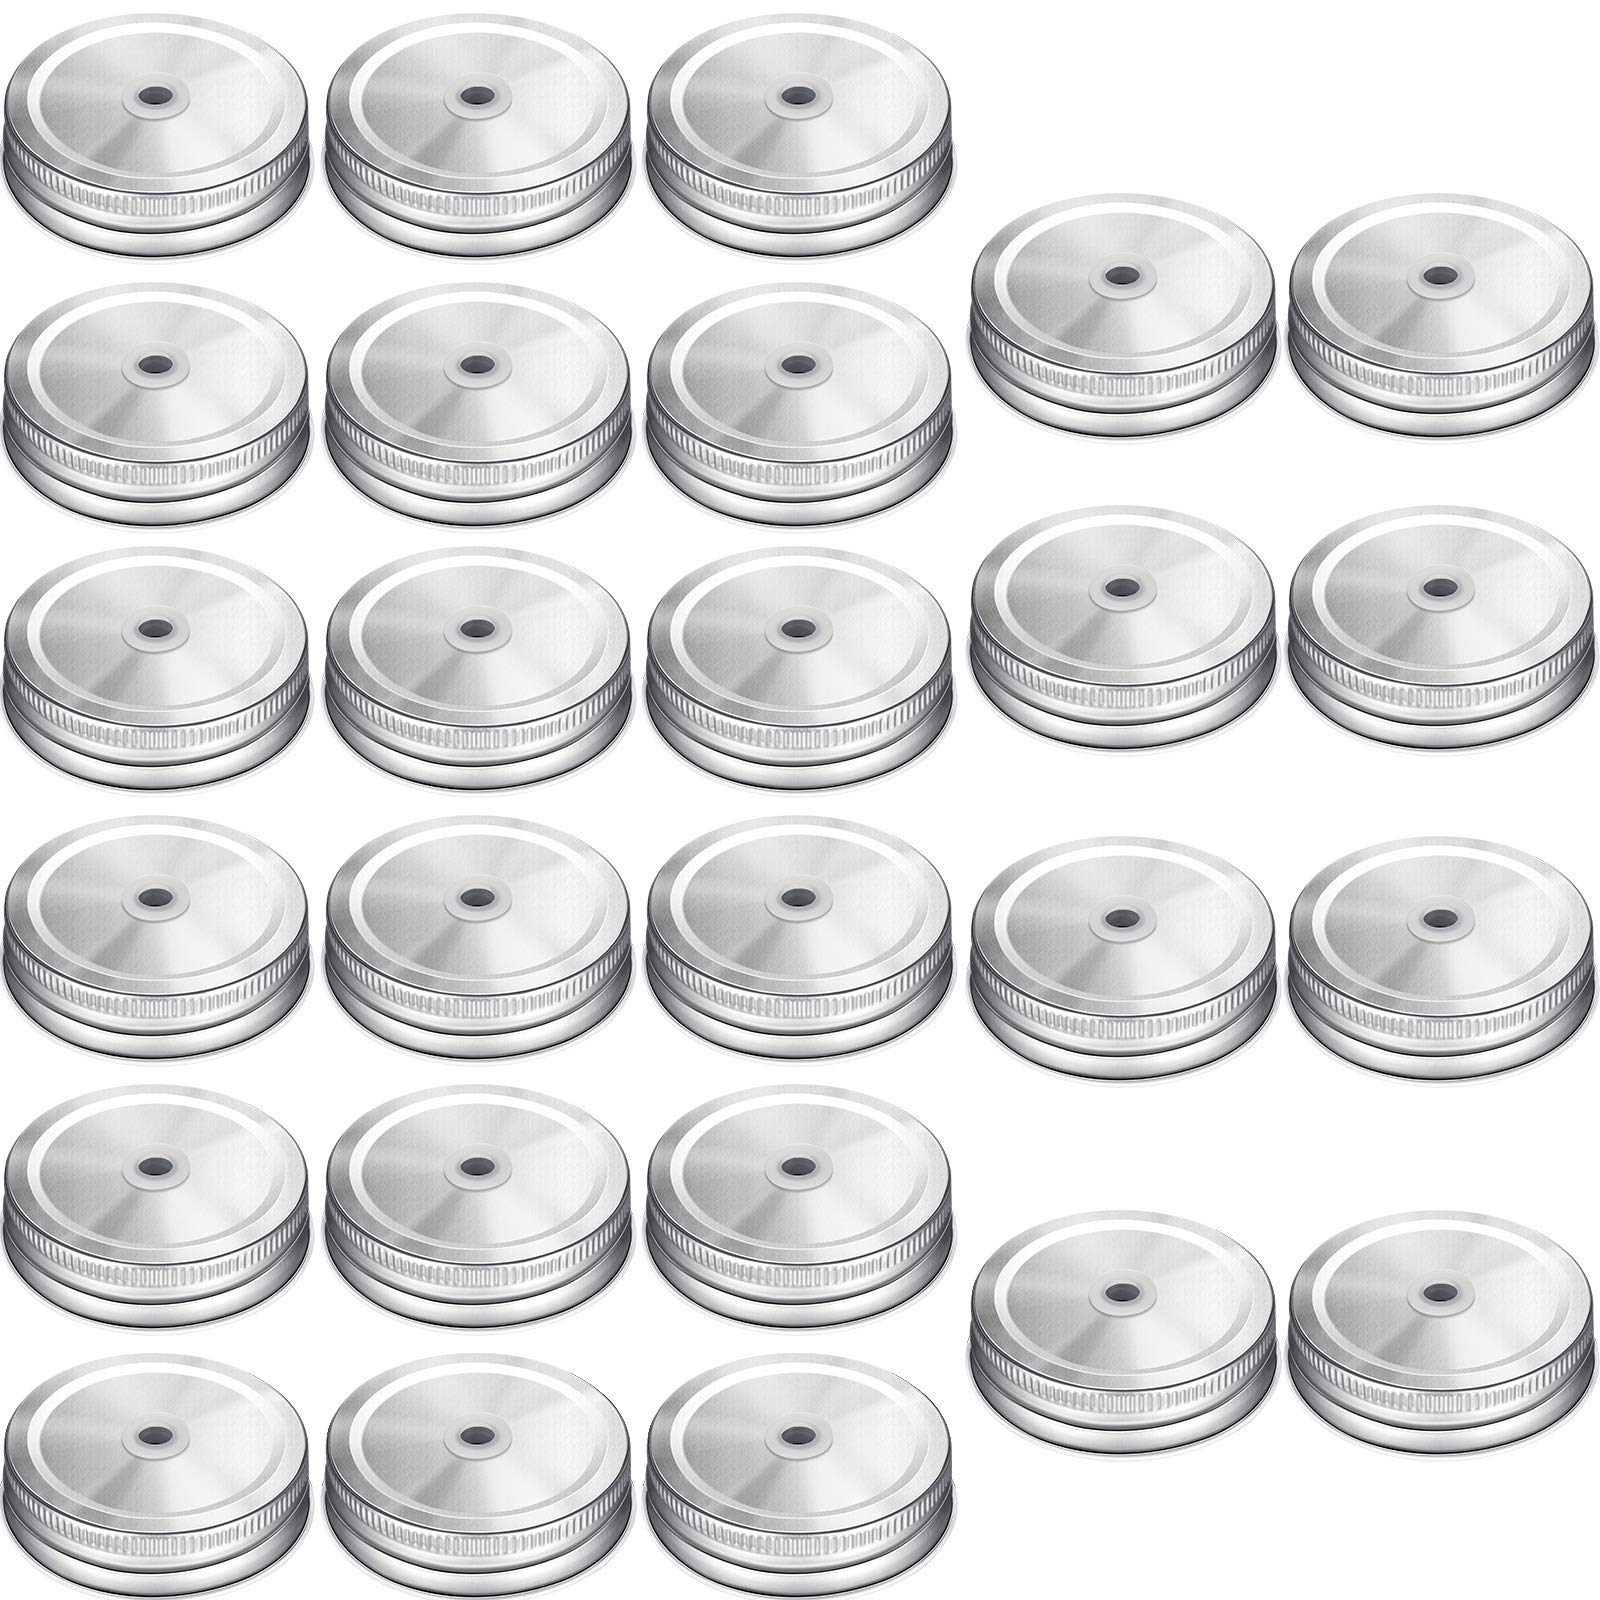 26 Packs Stainless Steel Regular Mouth Mason Silver Jar Lids with Straw Hole Compatible with Mason Jar